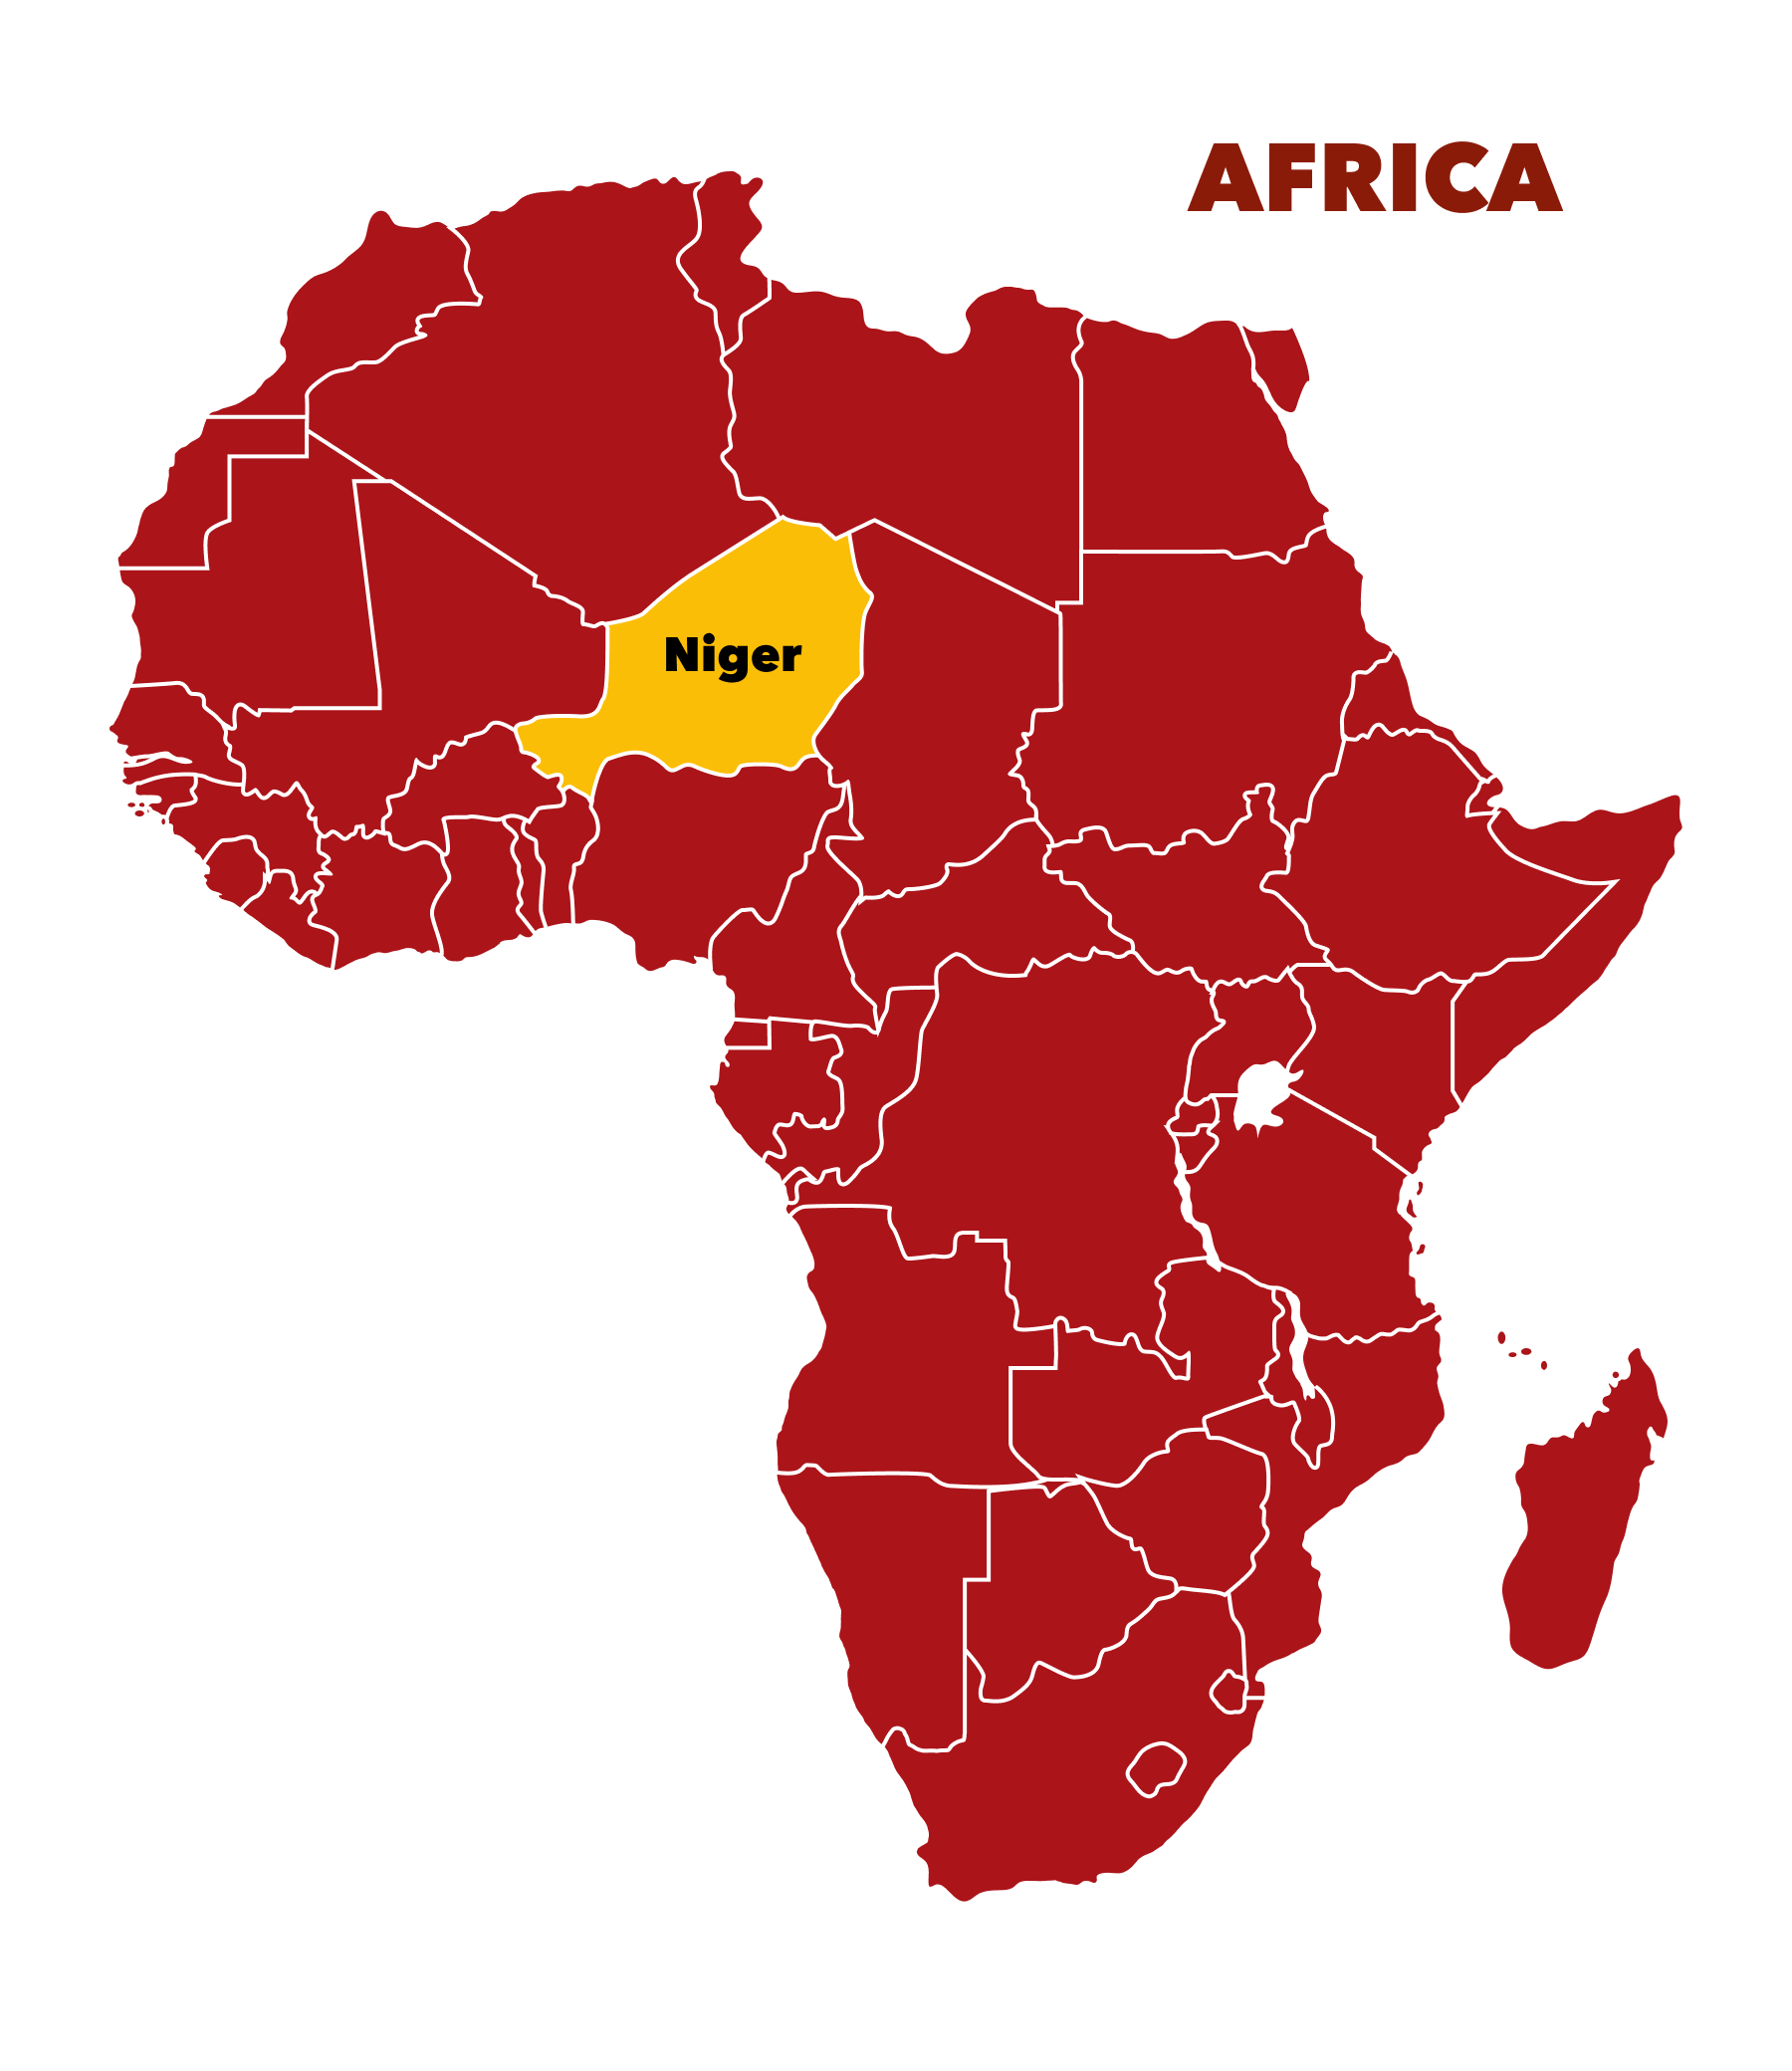 Map of Africa - Niger